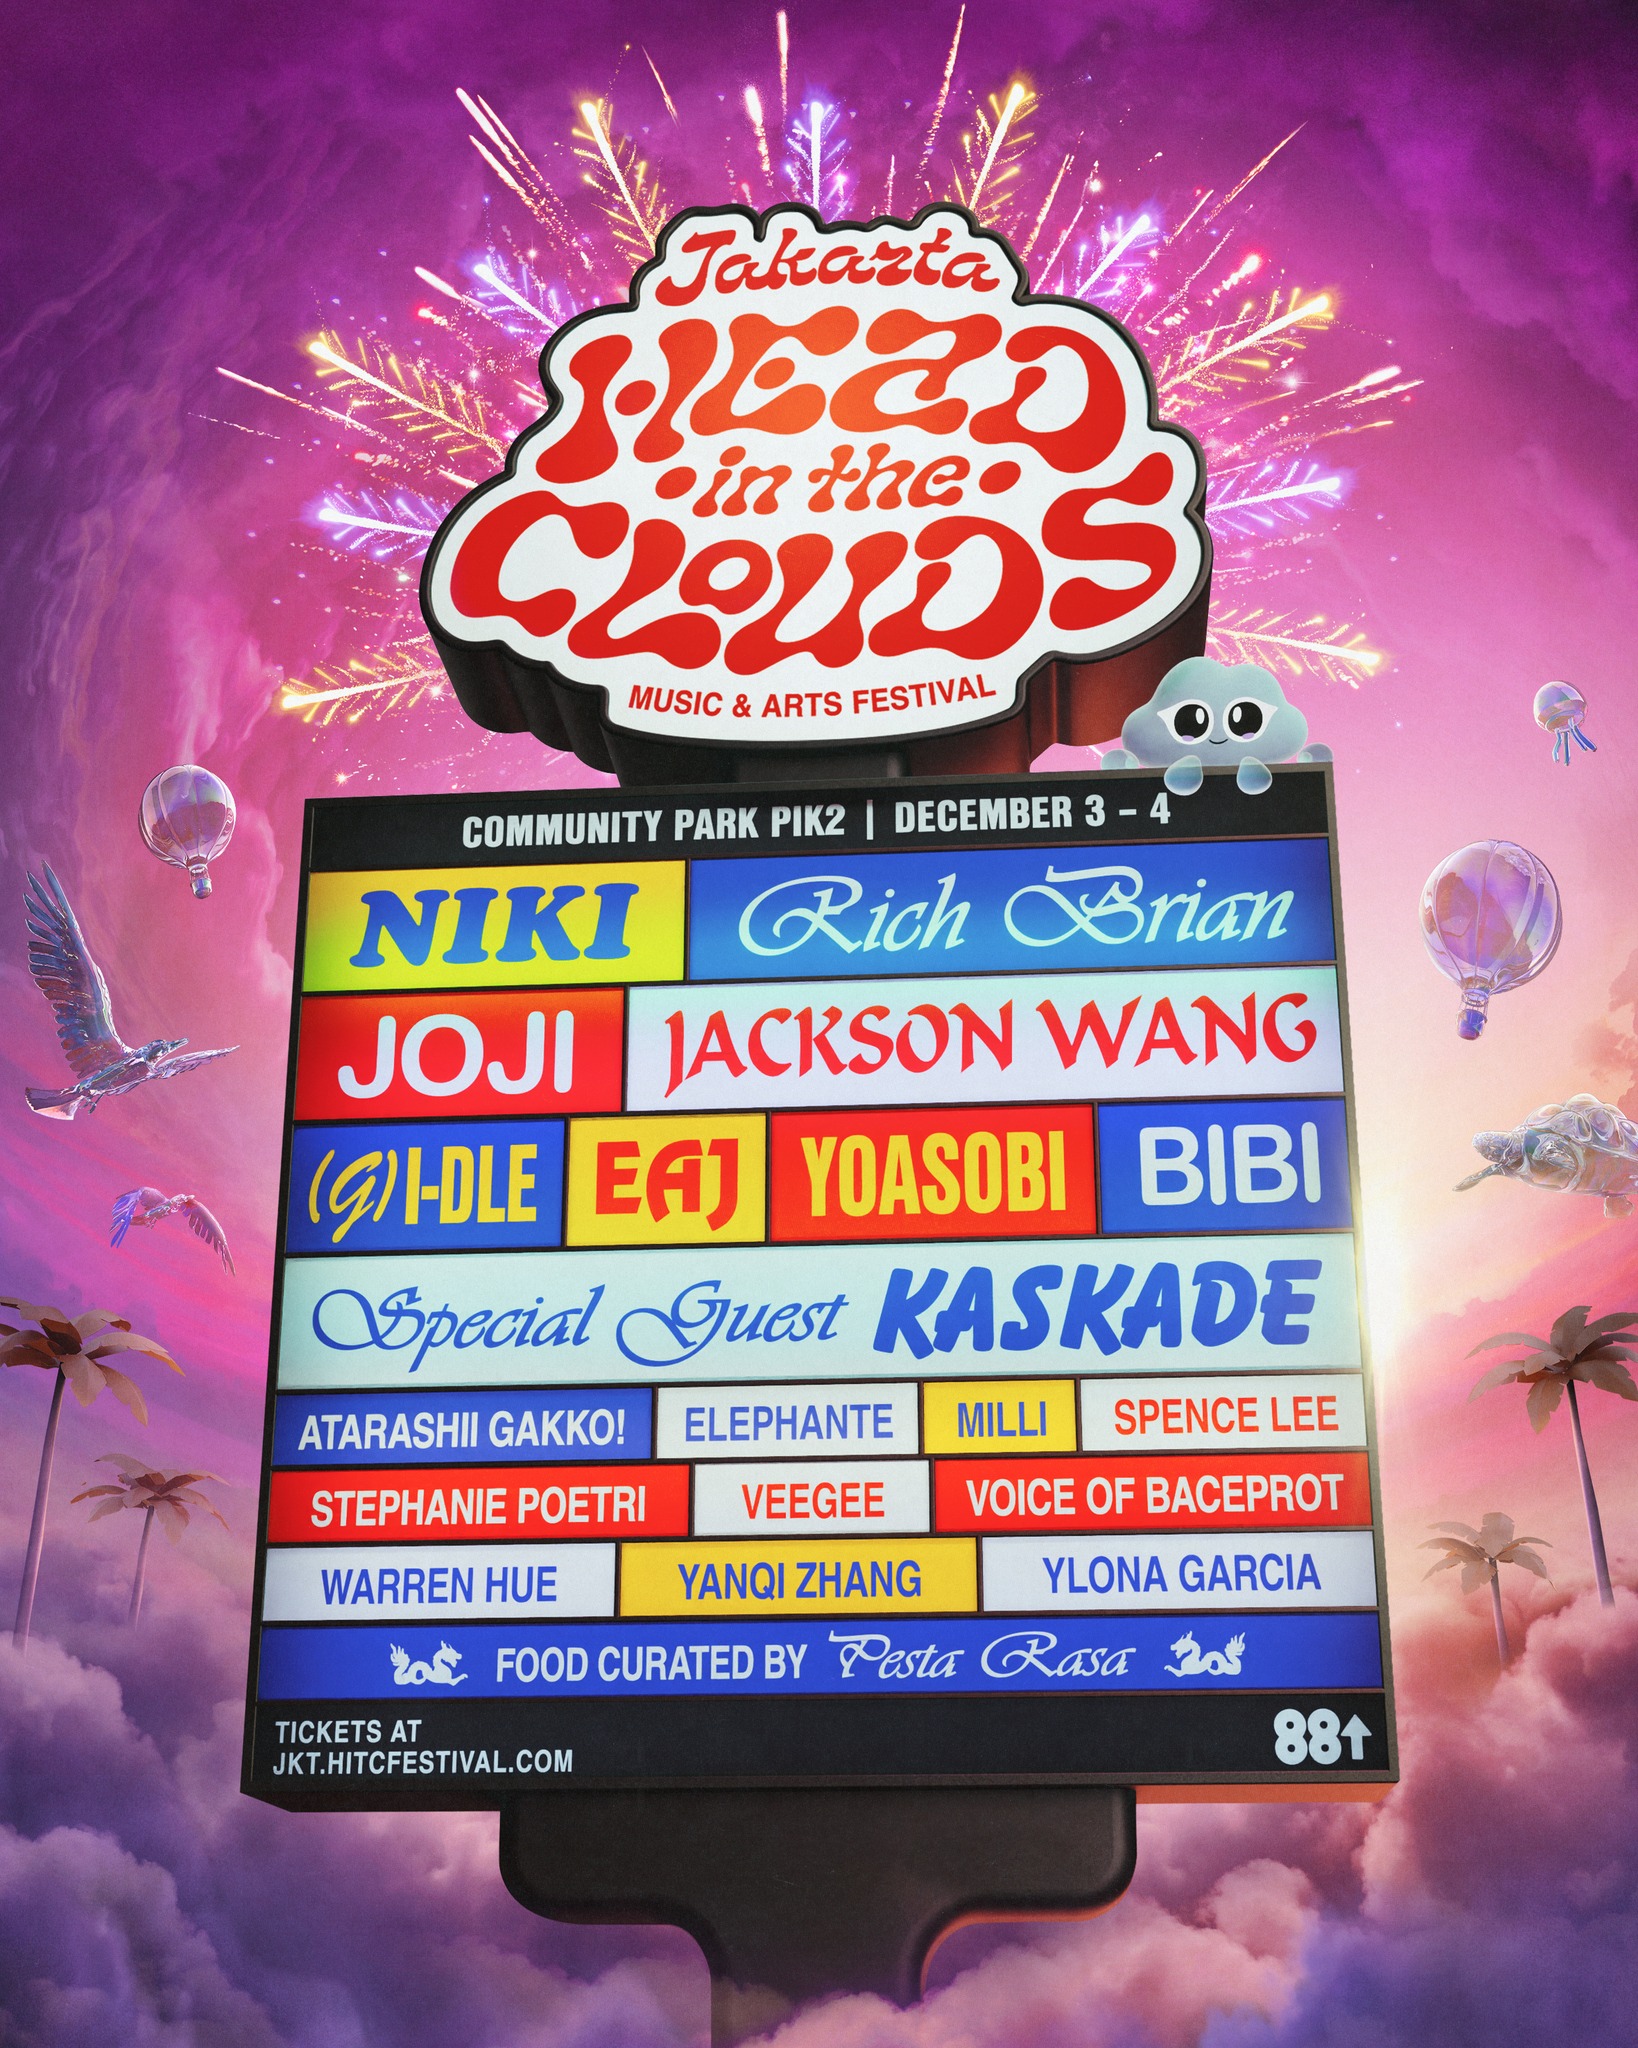 Head in the Clouds Jakarta Dates, Tickets, Lineup